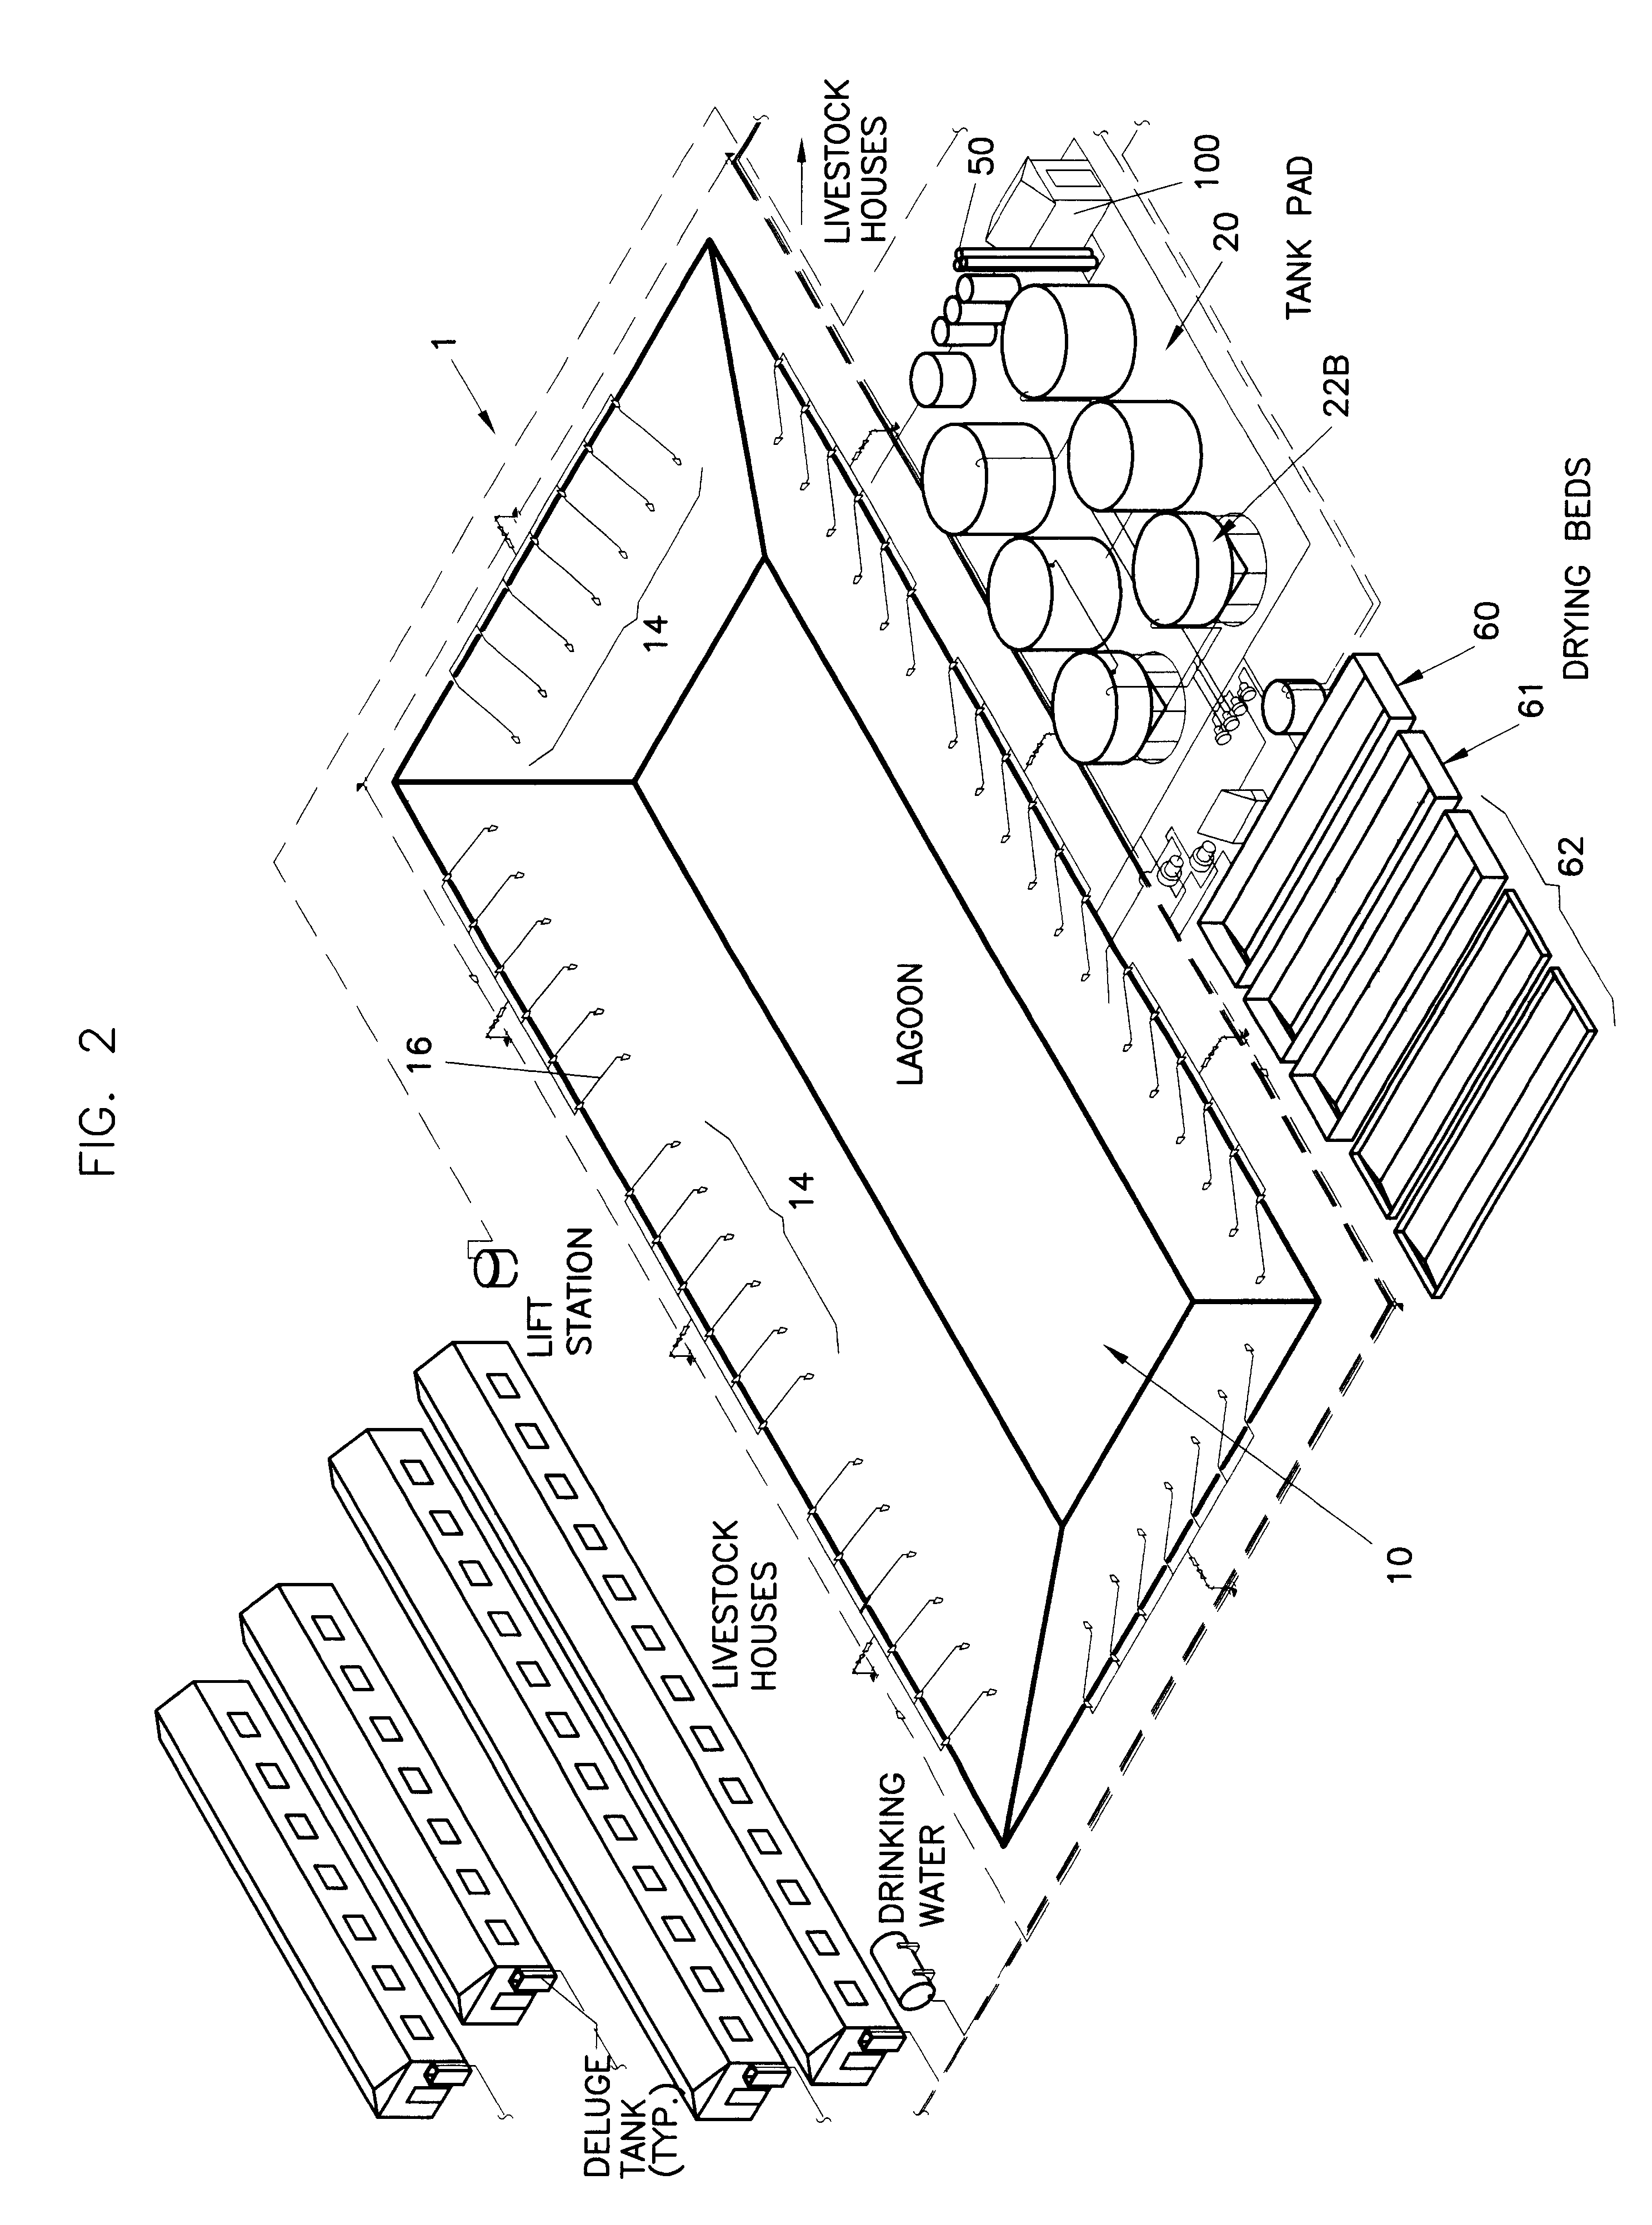 Apparatus and method for purification of agricultural animal waste